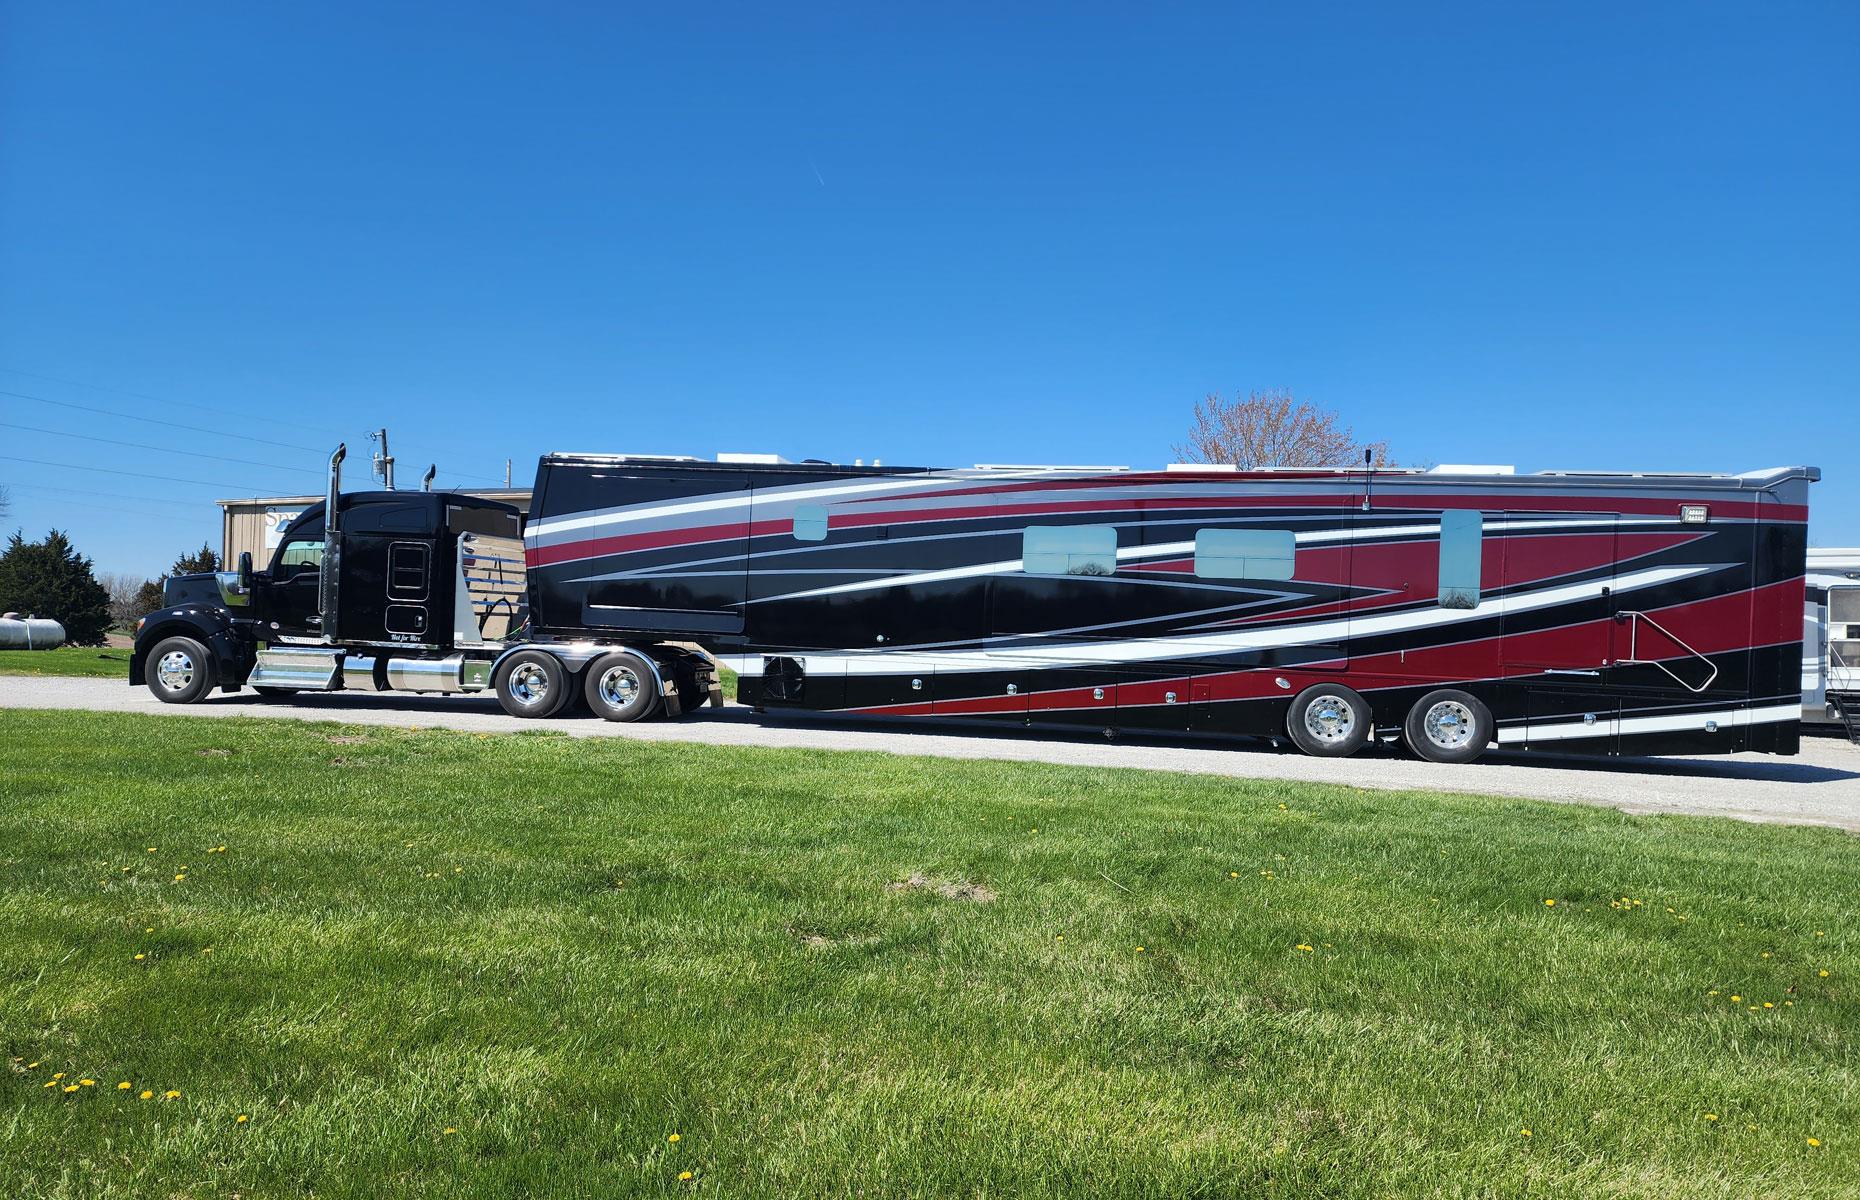 <p>With impossibly elongated proportions, SpaceCraft's flagship motorhome is along an elite group of super-large RVs, measuring 57 feet in length.</p>  <p>Missouri-based <a href="https://spacecraftmfg.com/">SpaceCraft</a> allows its clientele extensive customization options to create a space that's optimized to their needs, meaning each RV made by the company is a one-off design.</p>